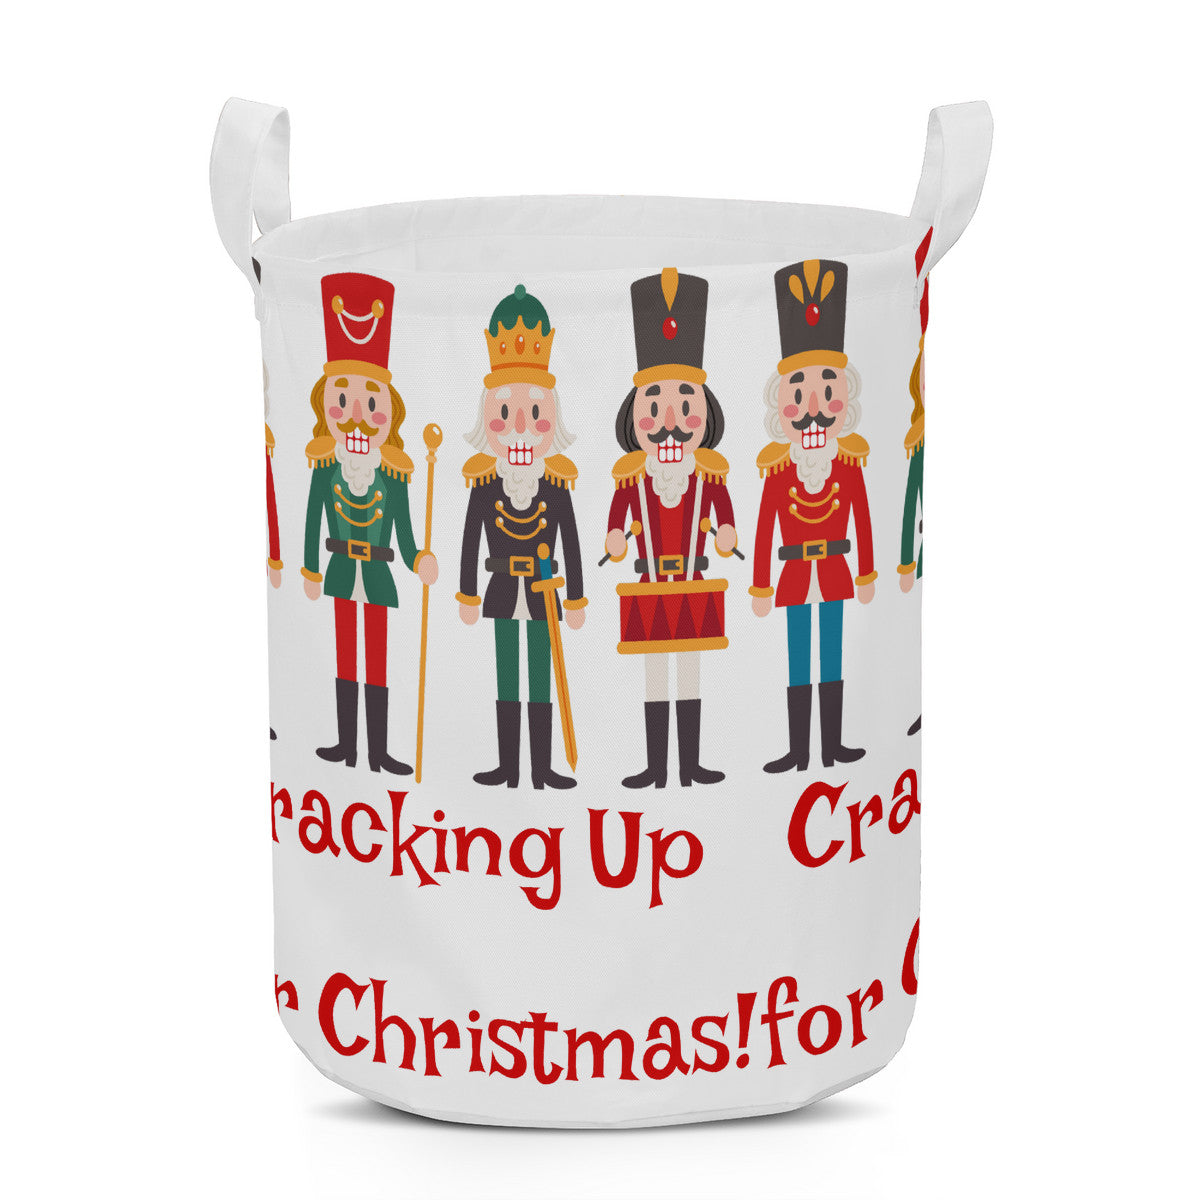 Round Laundry Basket Cracking up for Christmas Nutcrackers decoration Home-clothes-jewelry